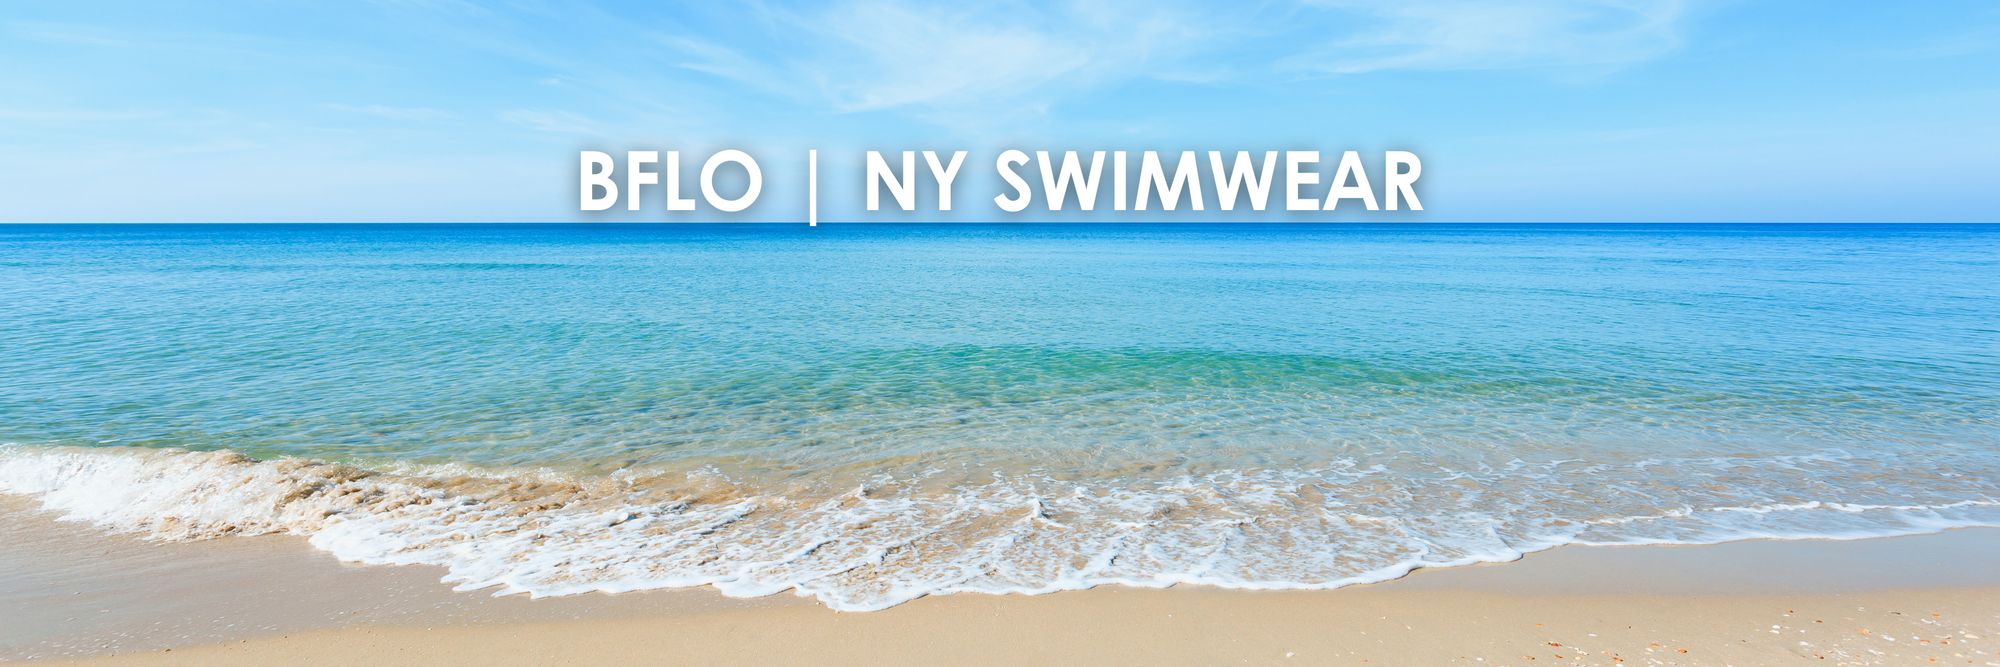 stock photo a beach and ocean with title reading BFLO | ny swimwear